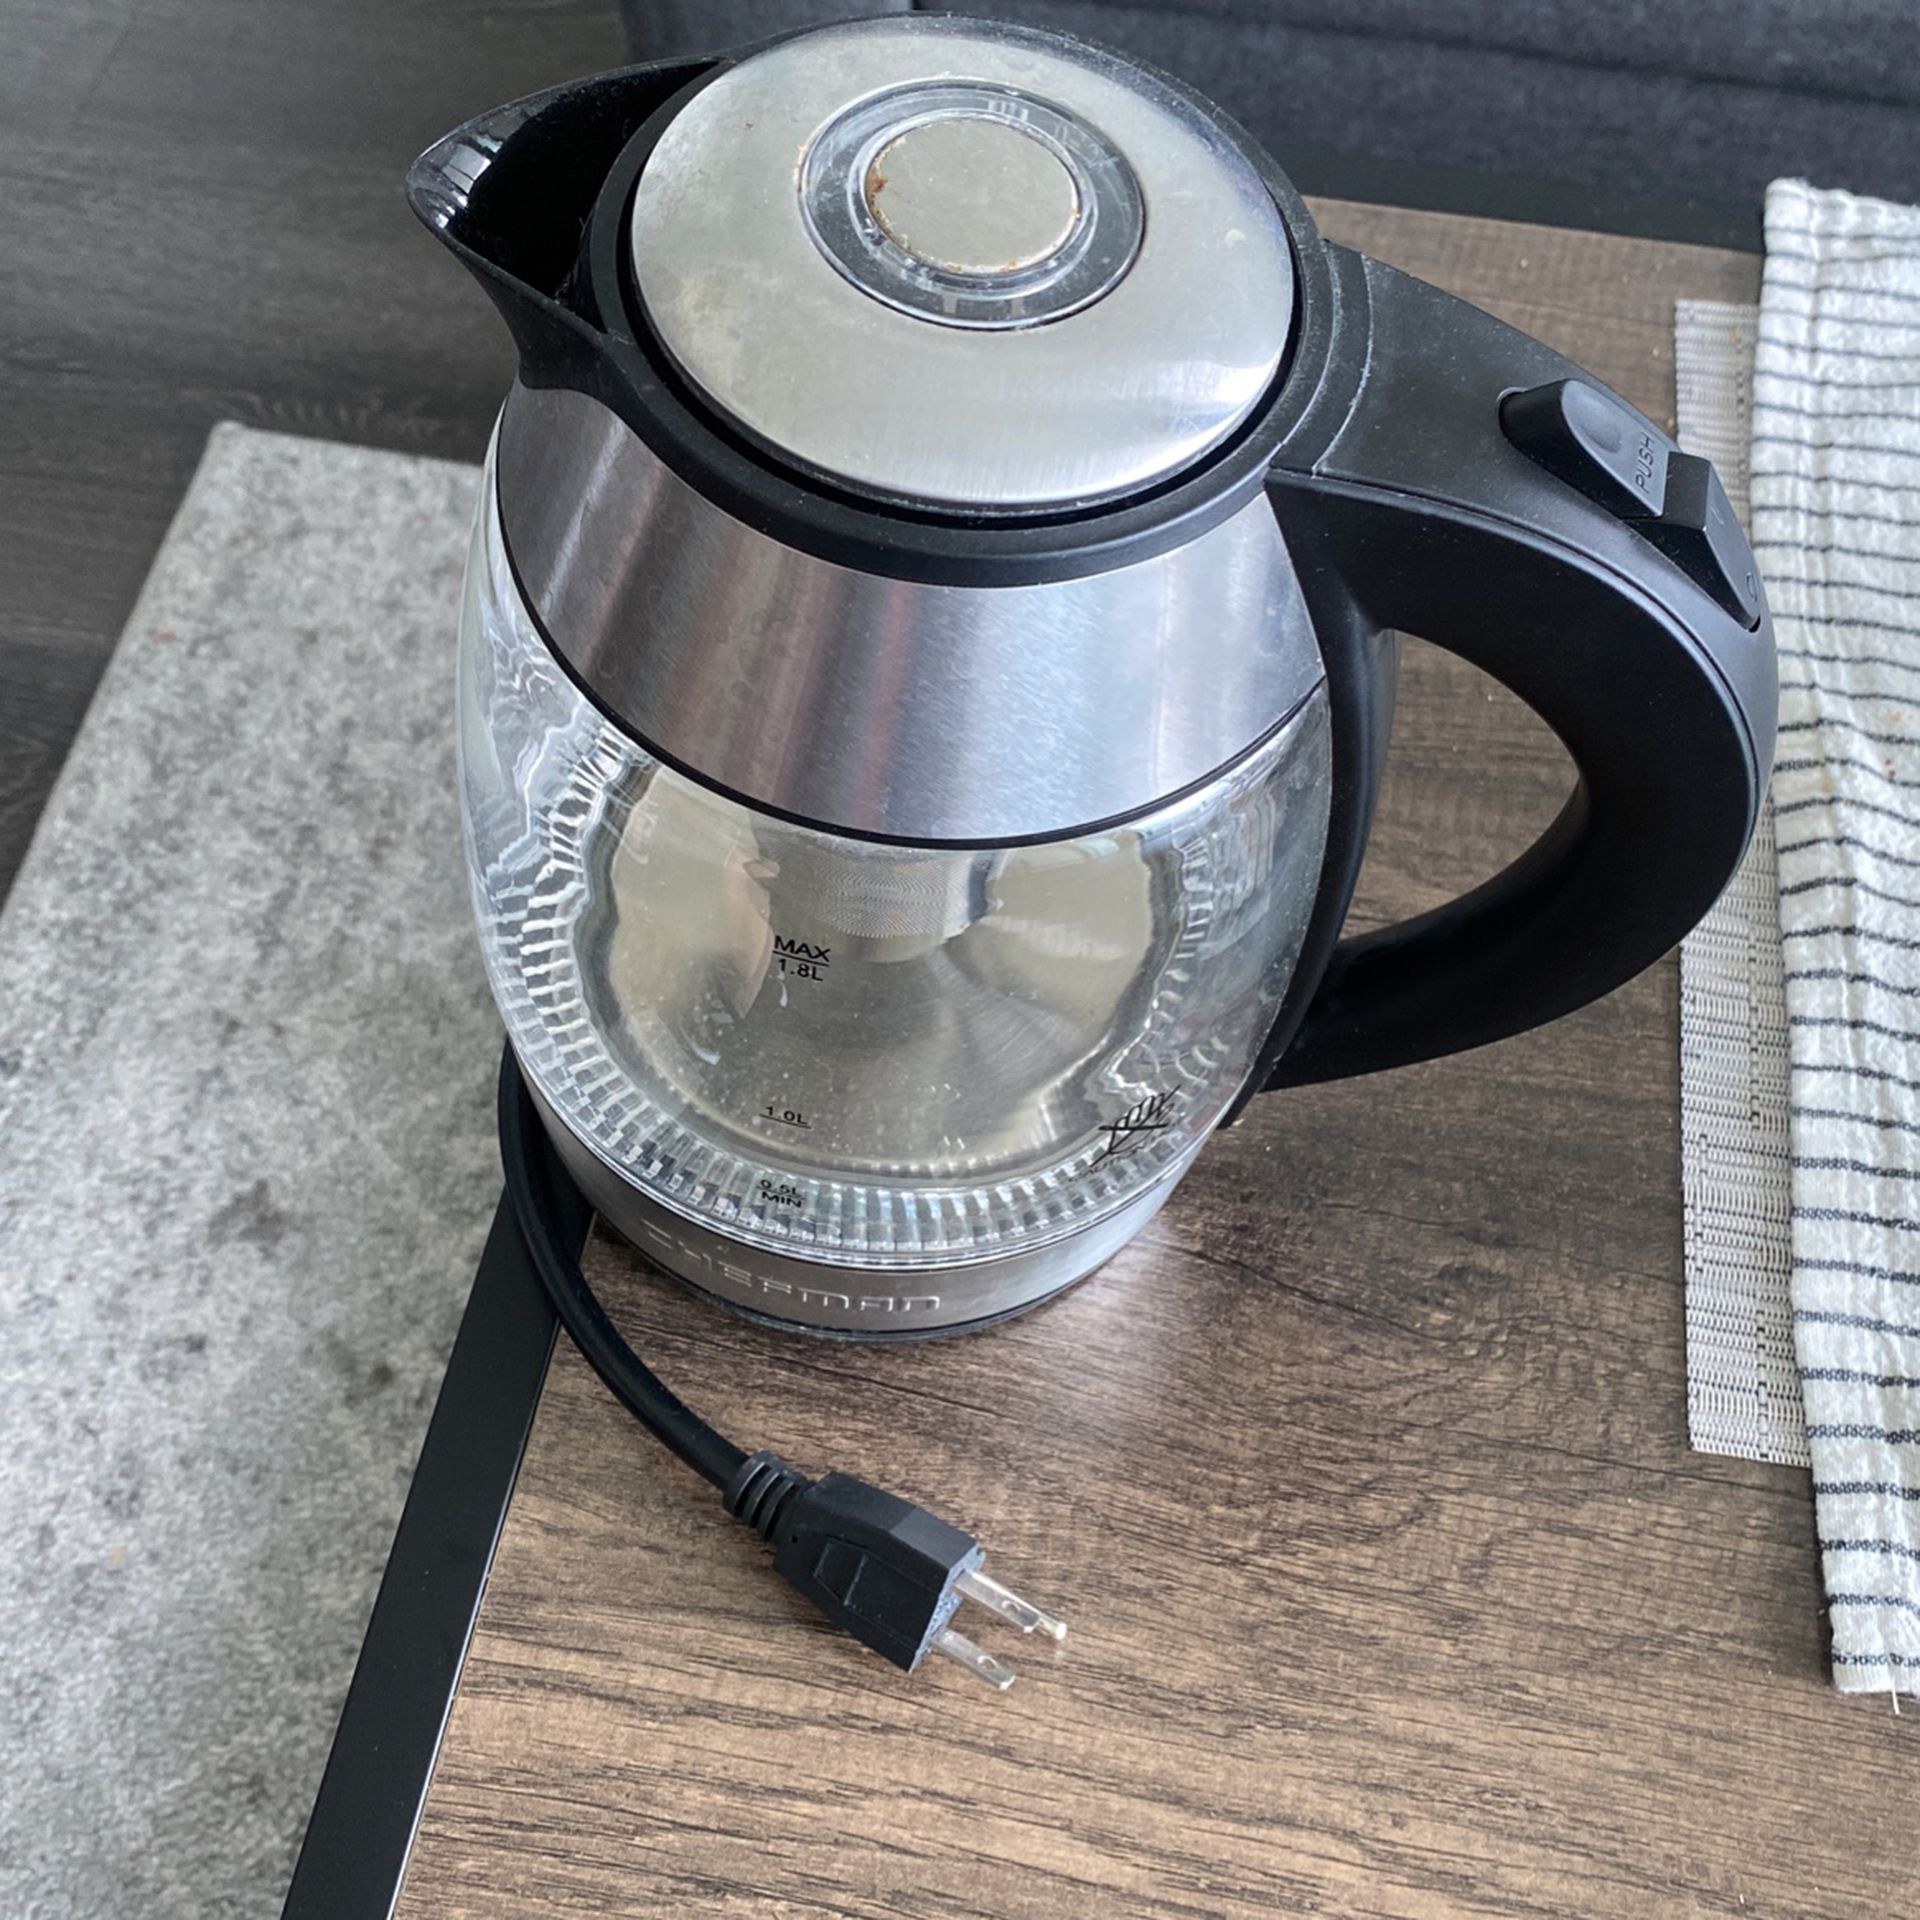 Hamilton Beach Electric Water Kettle for Sale in New York, NY - OfferUp